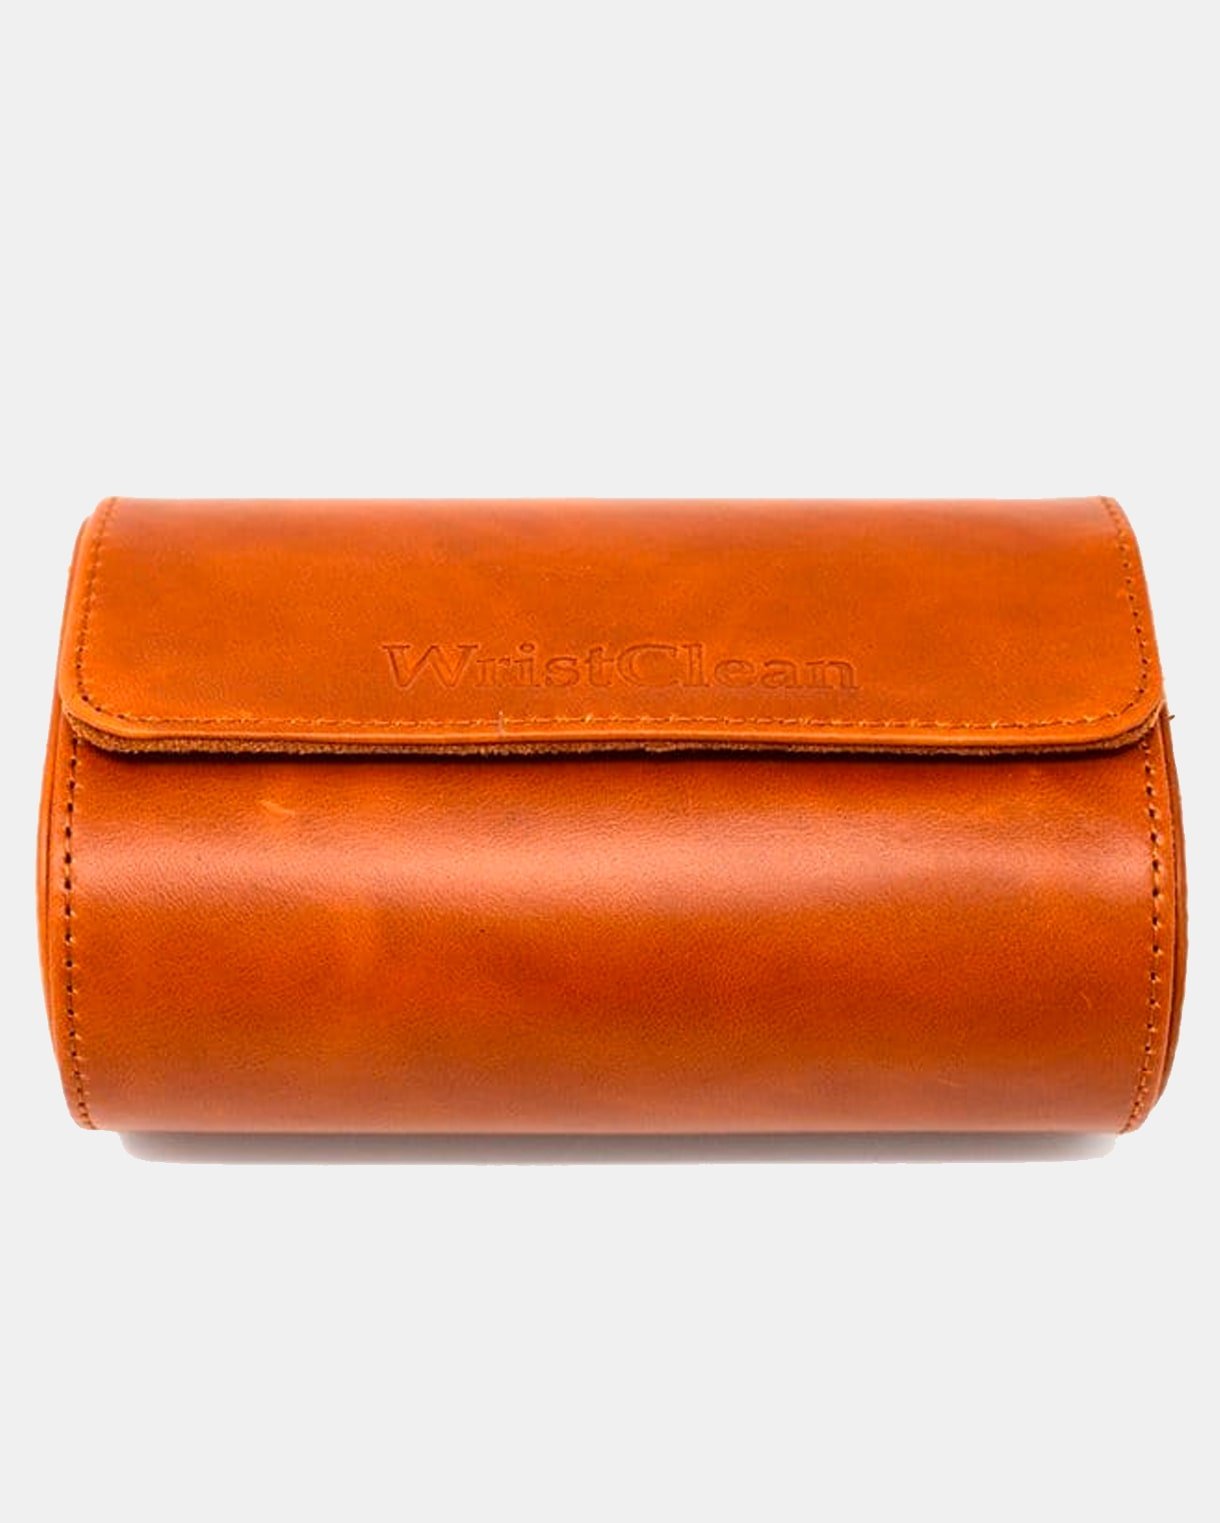 Leather Watch Roll for 2 - WristClean